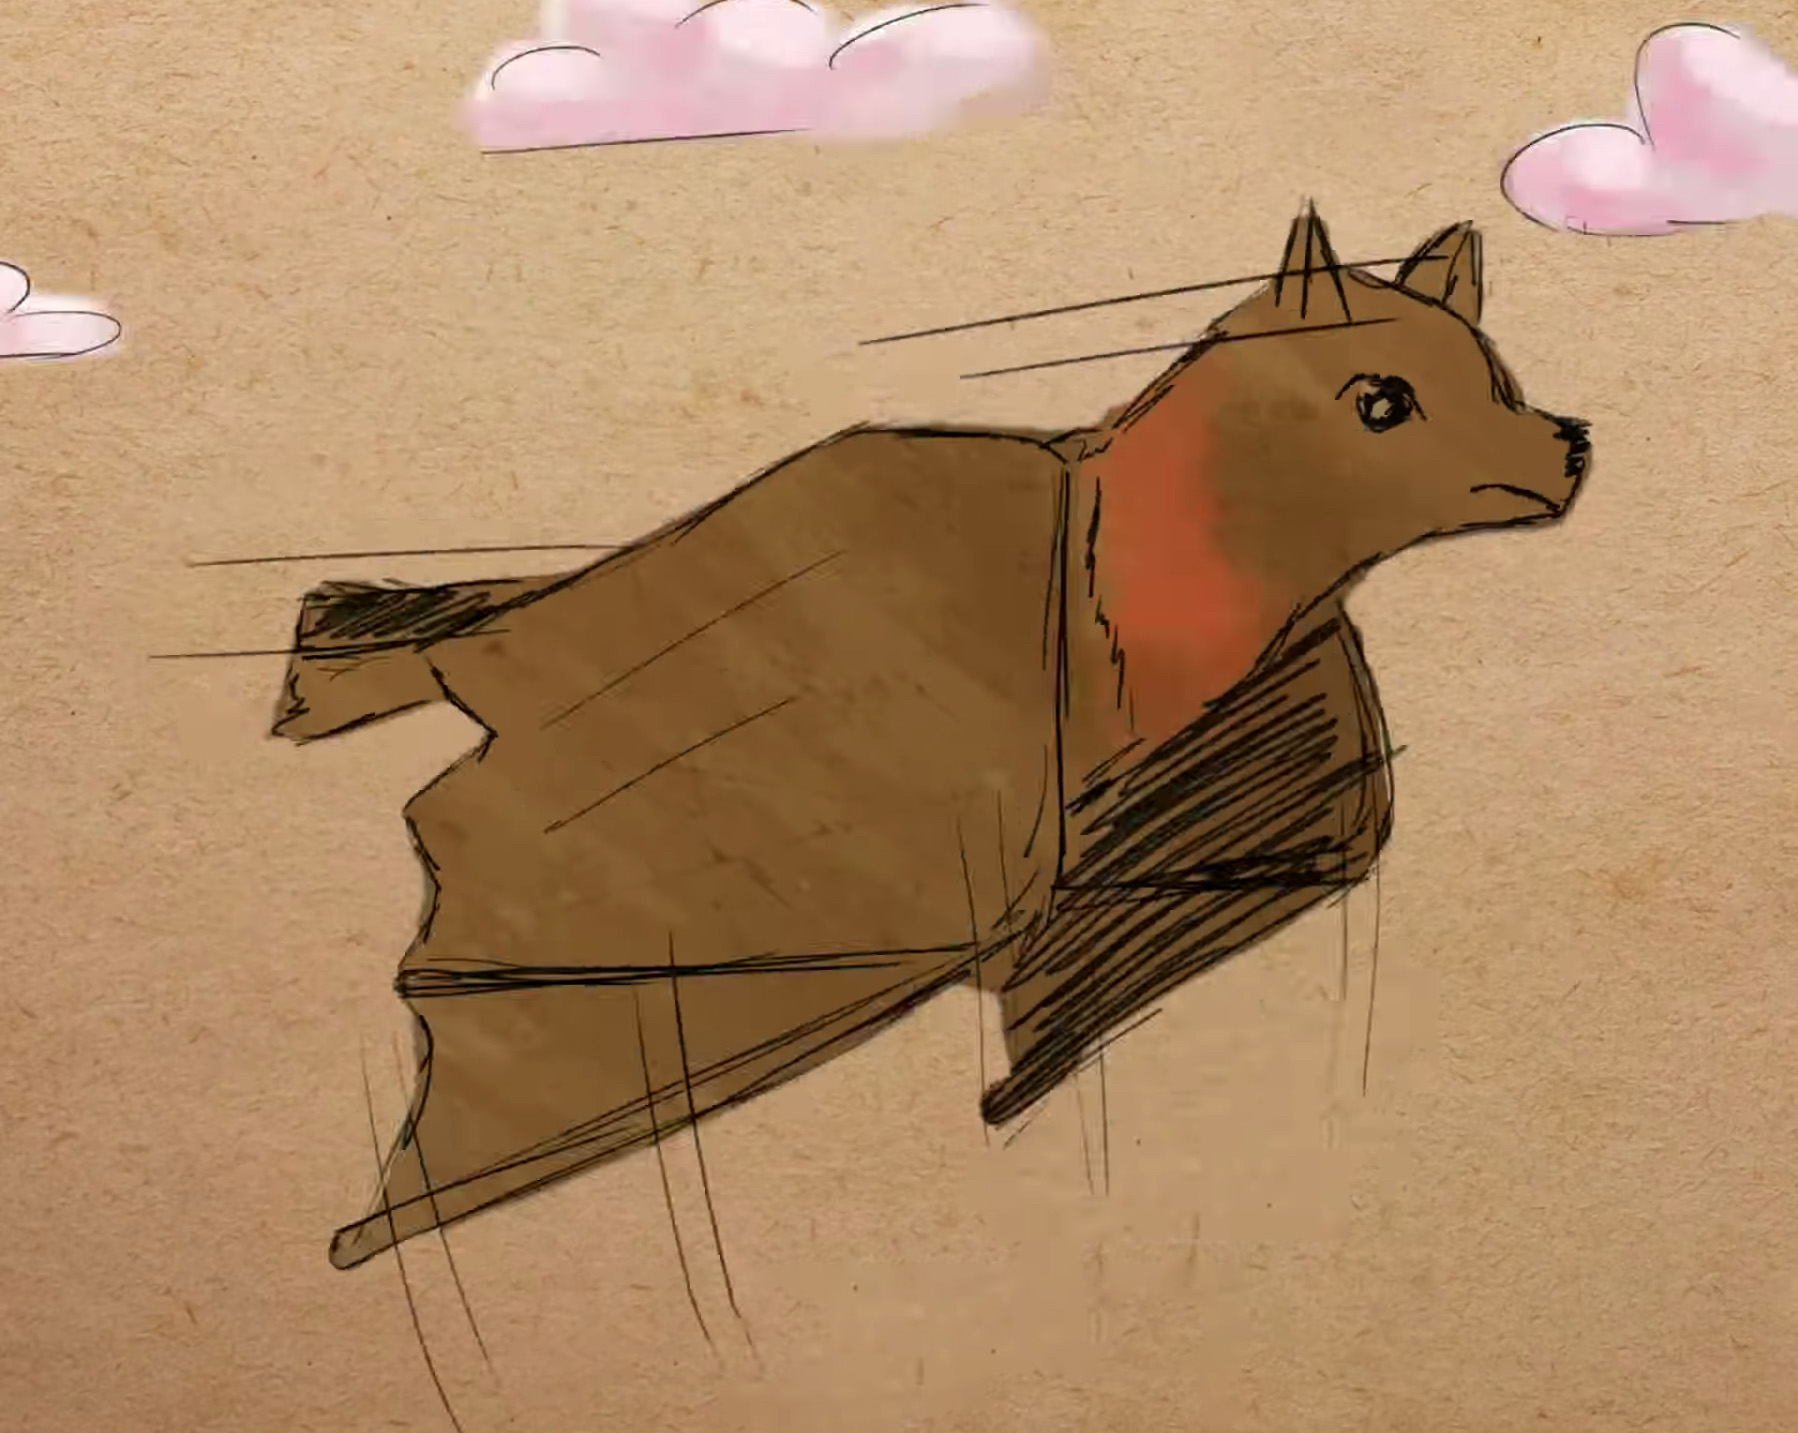 Illustration of an extinct guam flying fox. It looks like a giant bat, with a red patch on its brown body.